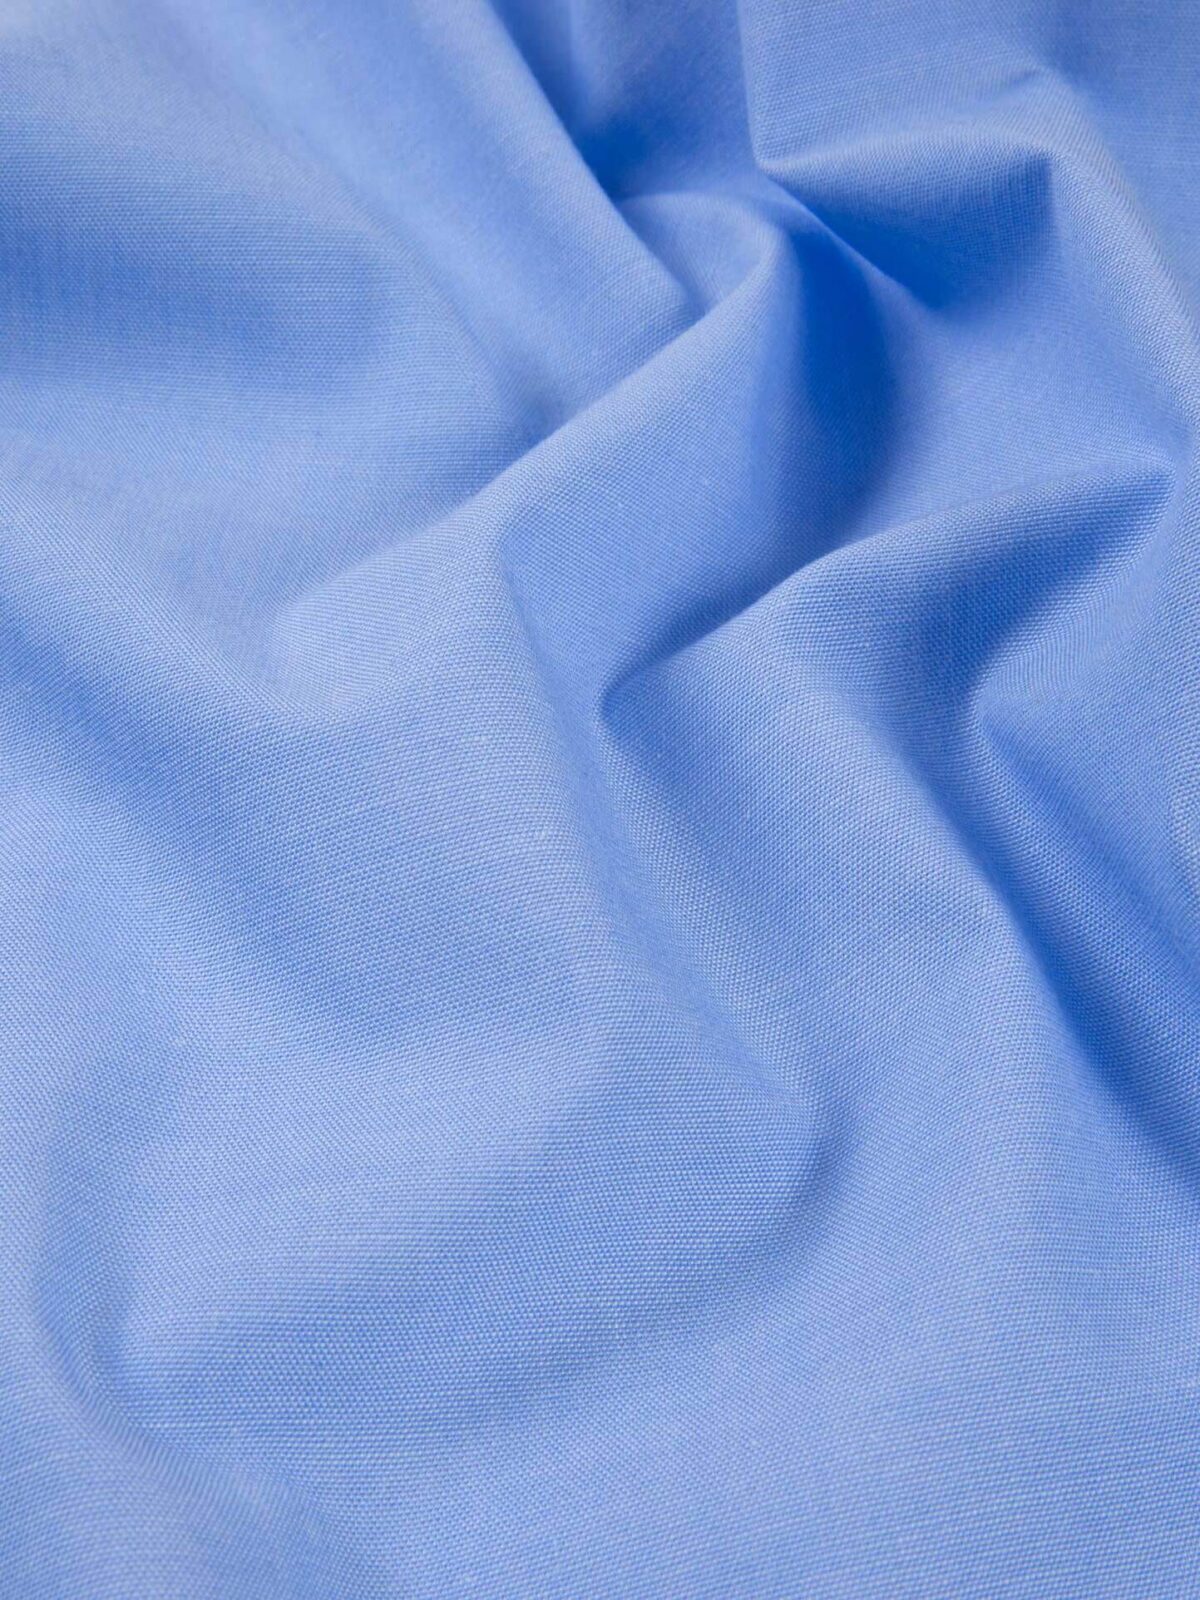 Plain Light Blue Chambray Fabric, Use: Garment at Rs 140/meter in